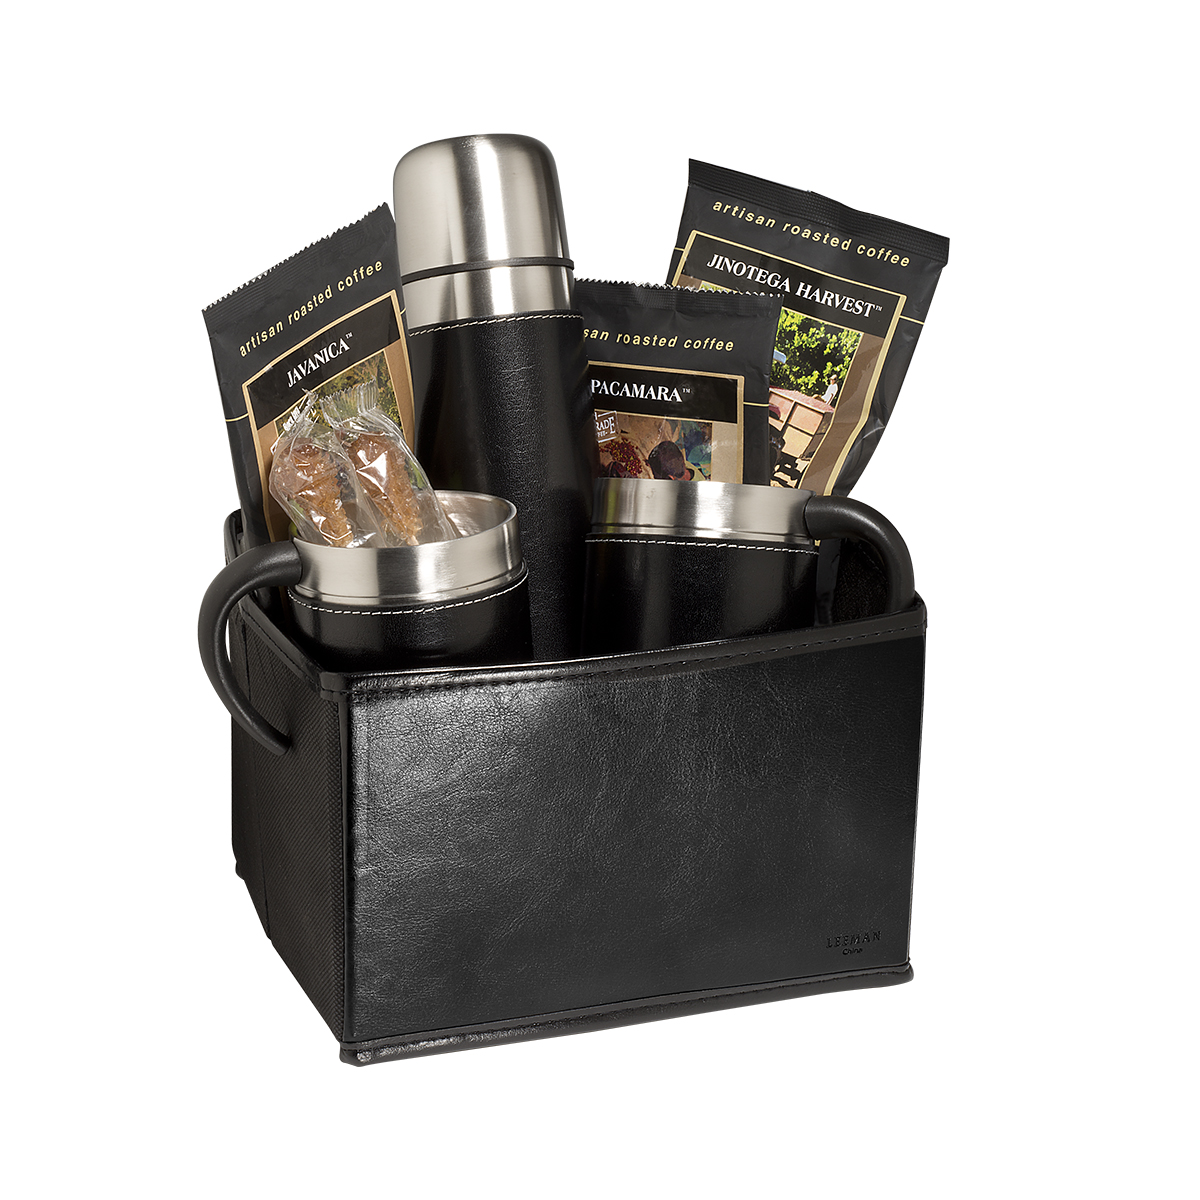 Empire™ Thermal Bottle & Cups Coffee Set